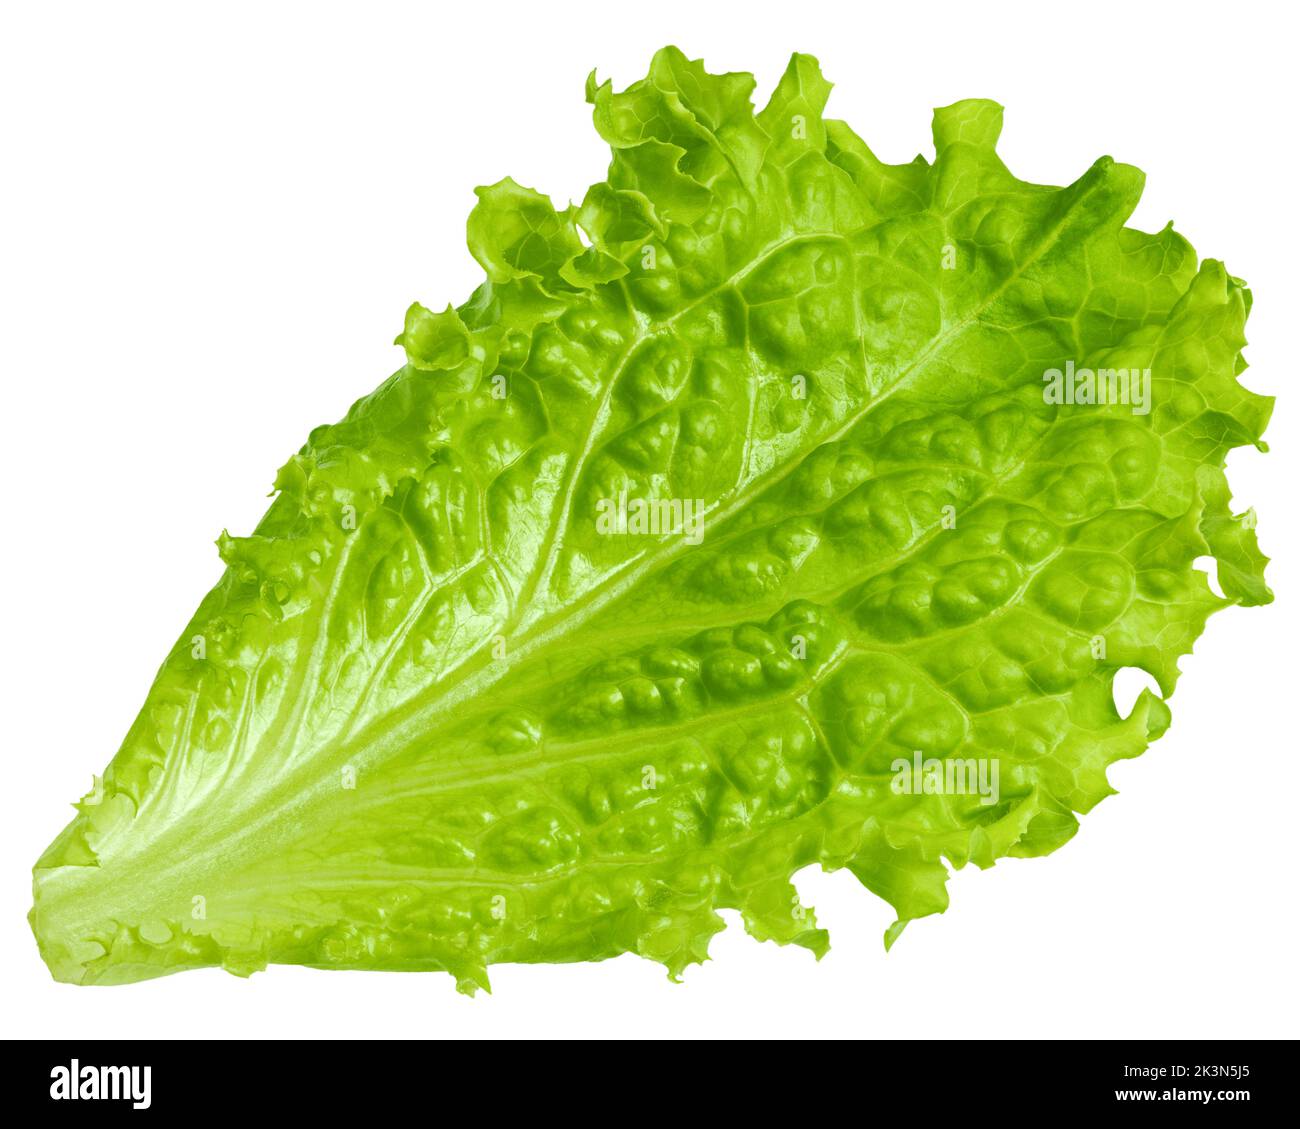 Salad leaf, lettuce, isolated on white background, clipping path, full depth of field Stock Photo